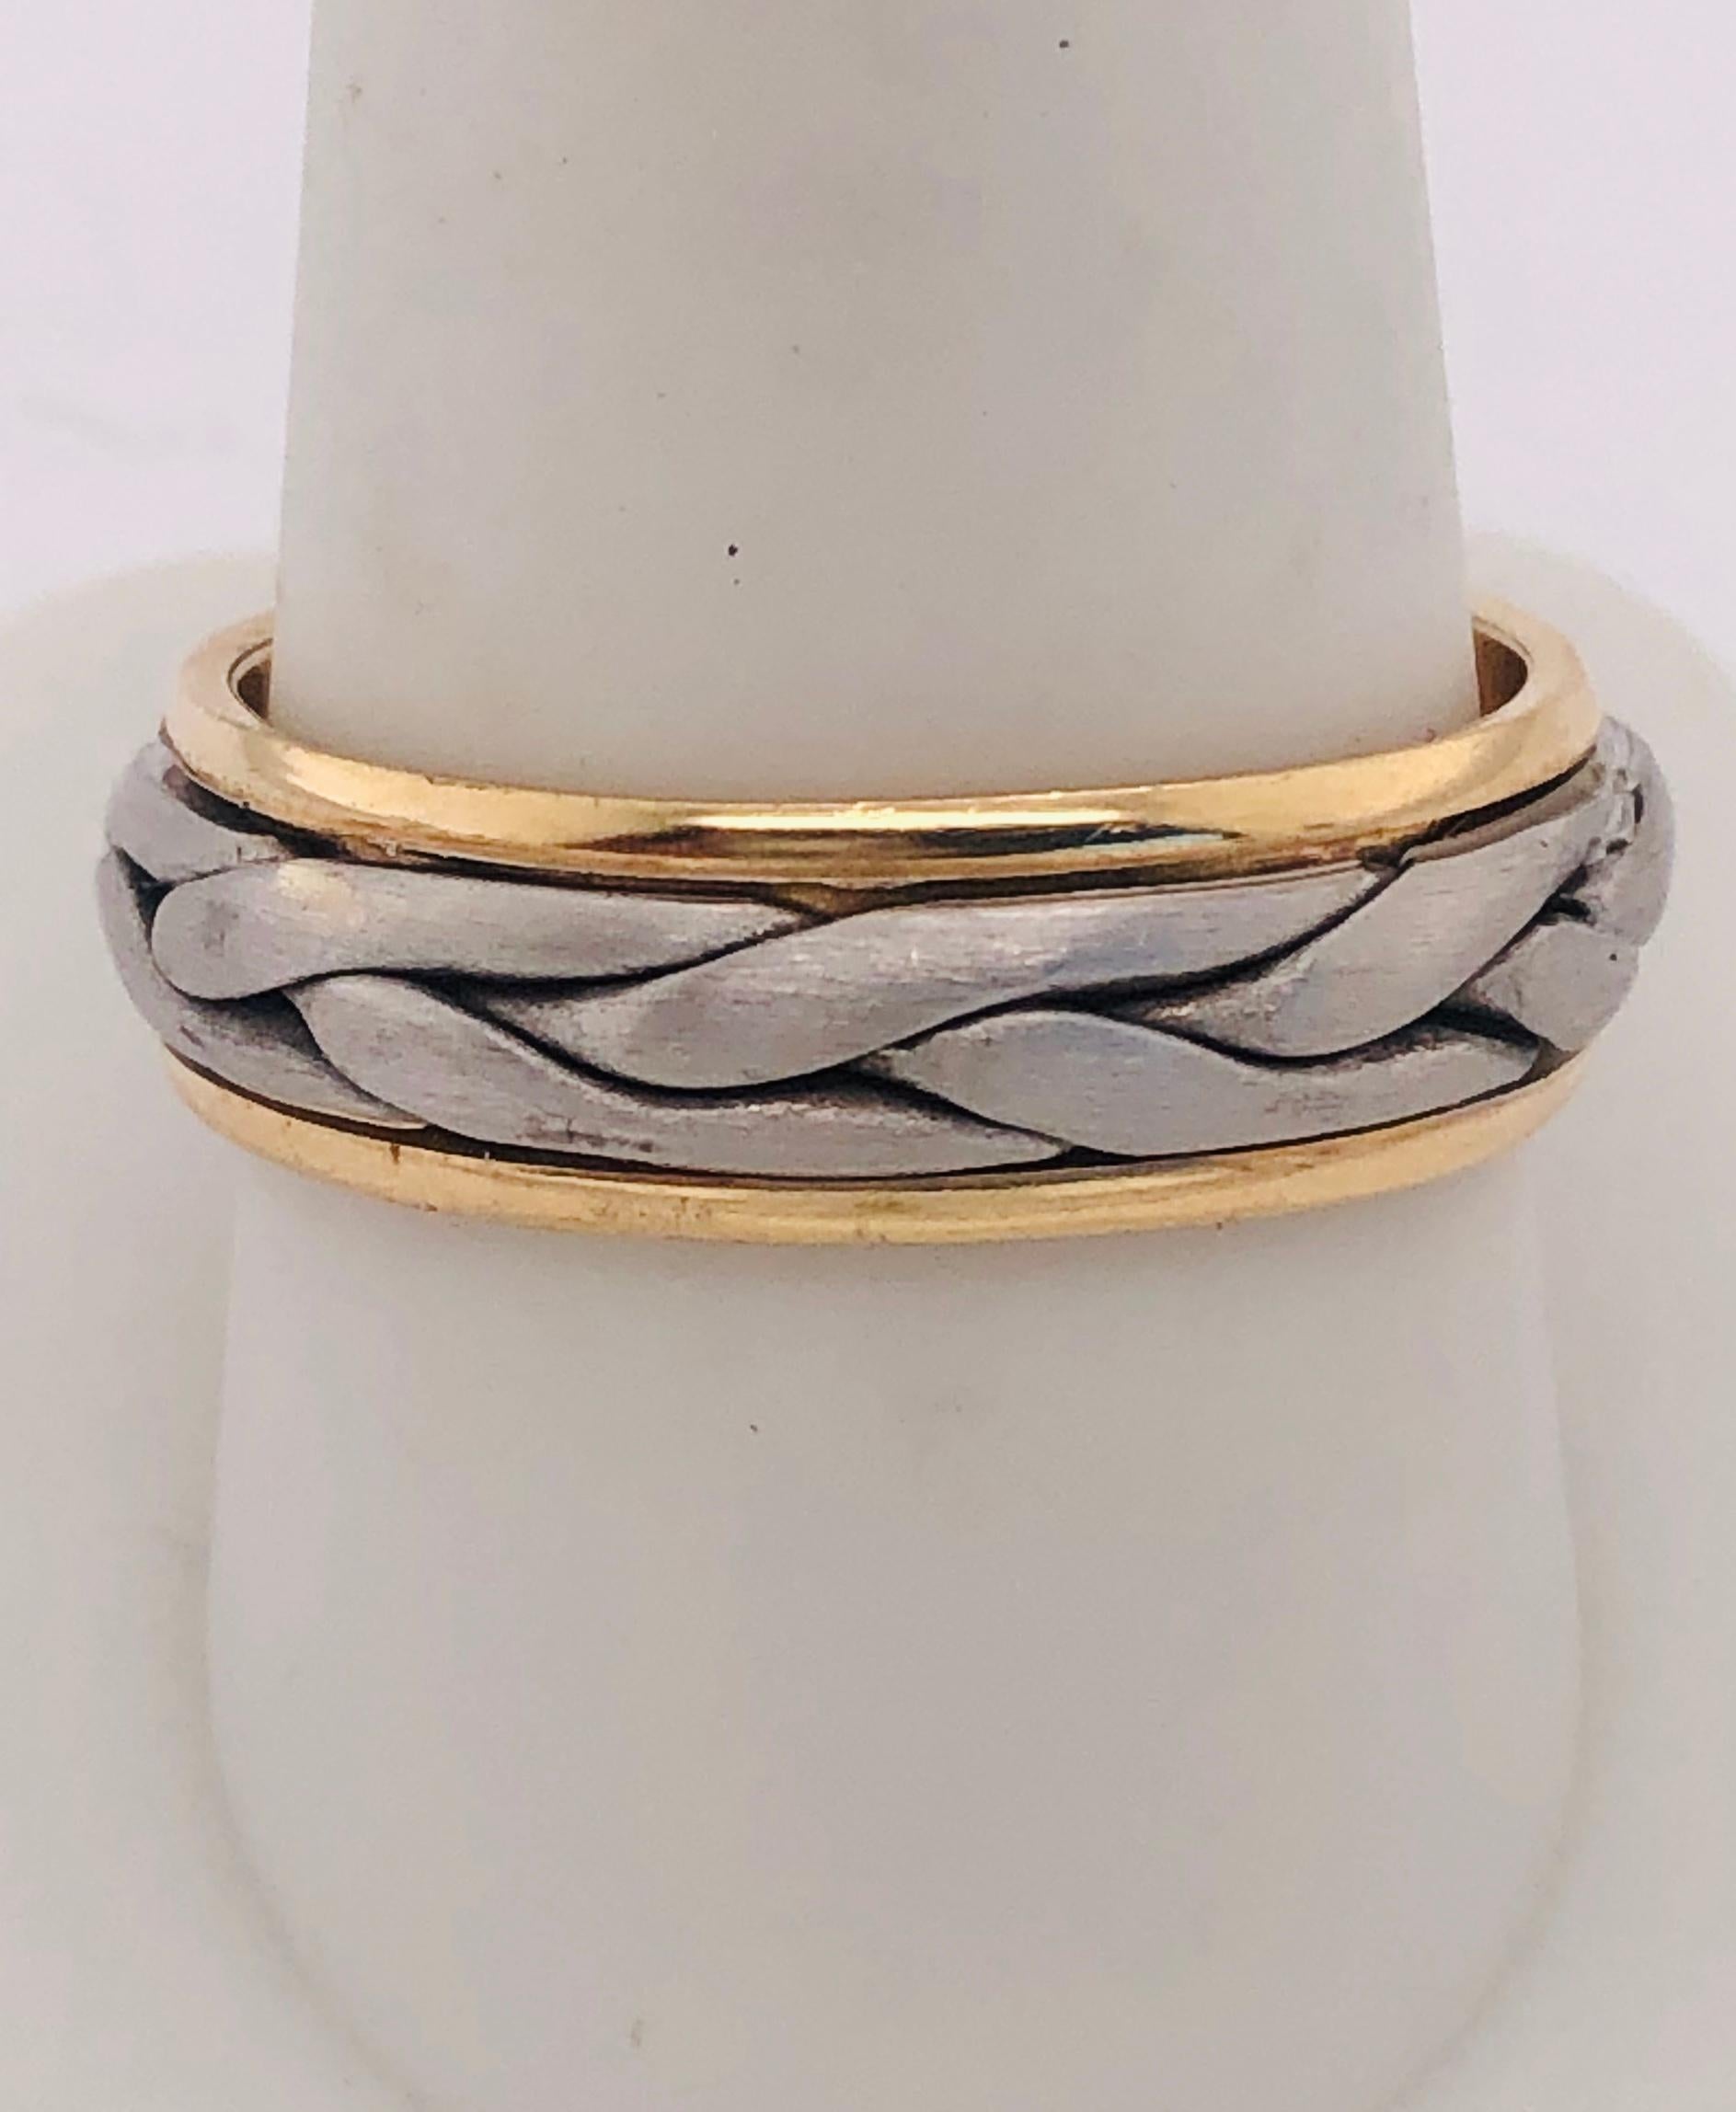 14Kt Braided Two Tone Yellow And White Gold Ring or Wedding Band
8.89 Size,  9.0 grams total weight